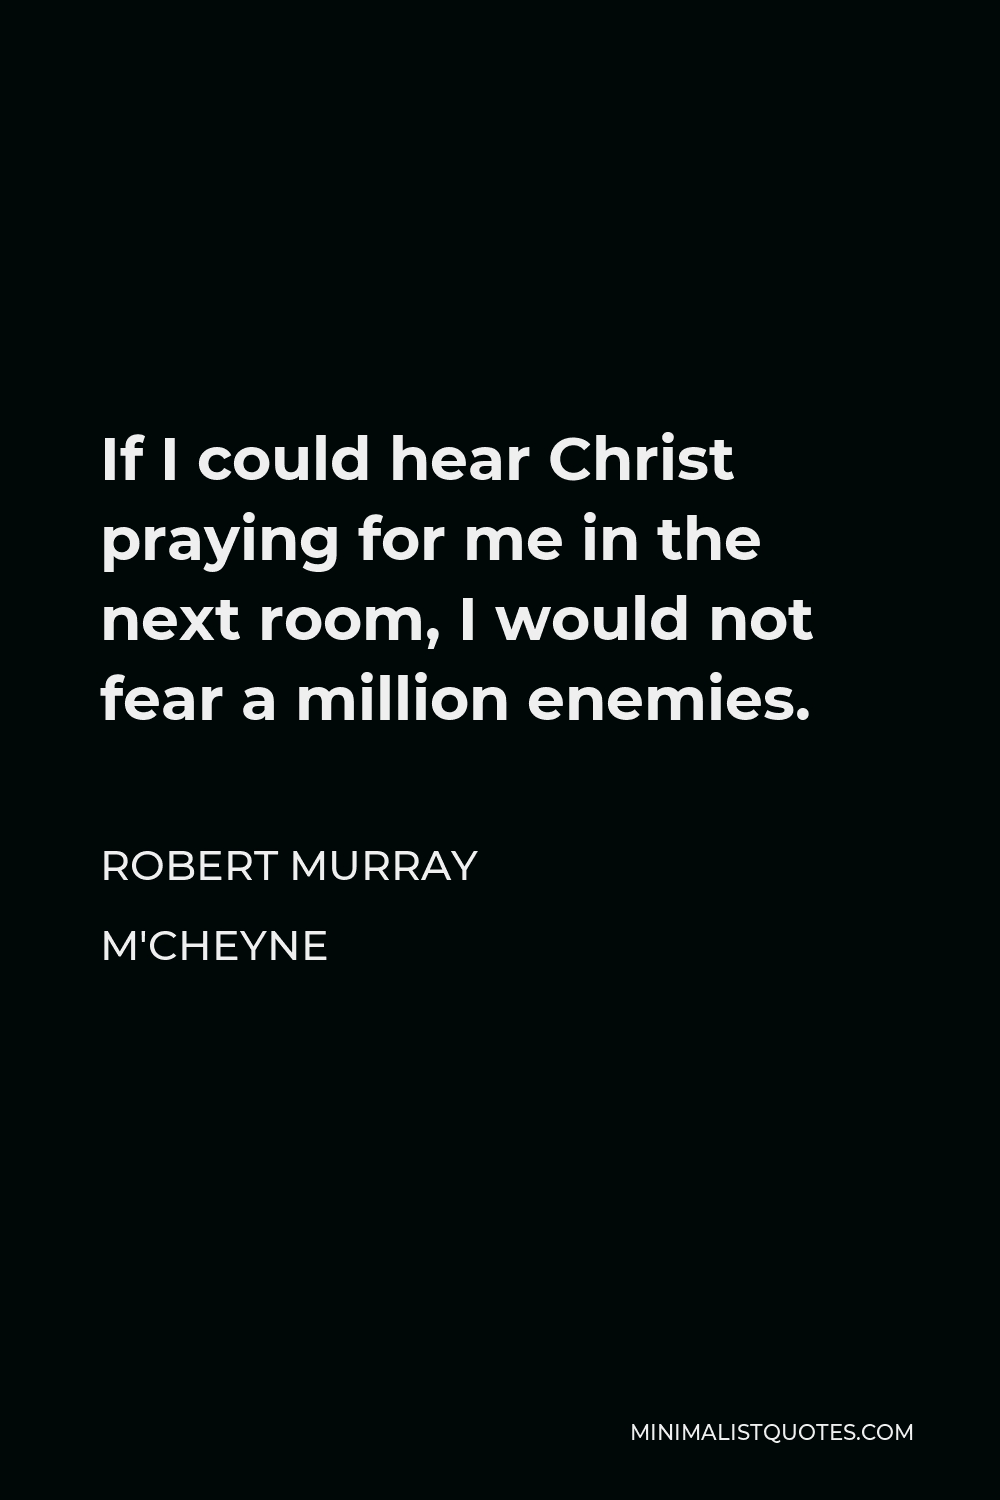 Robert Murray M'Cheyne Quote - If I could hear Christ praying for me in the next room, I would not fear a million enemies.